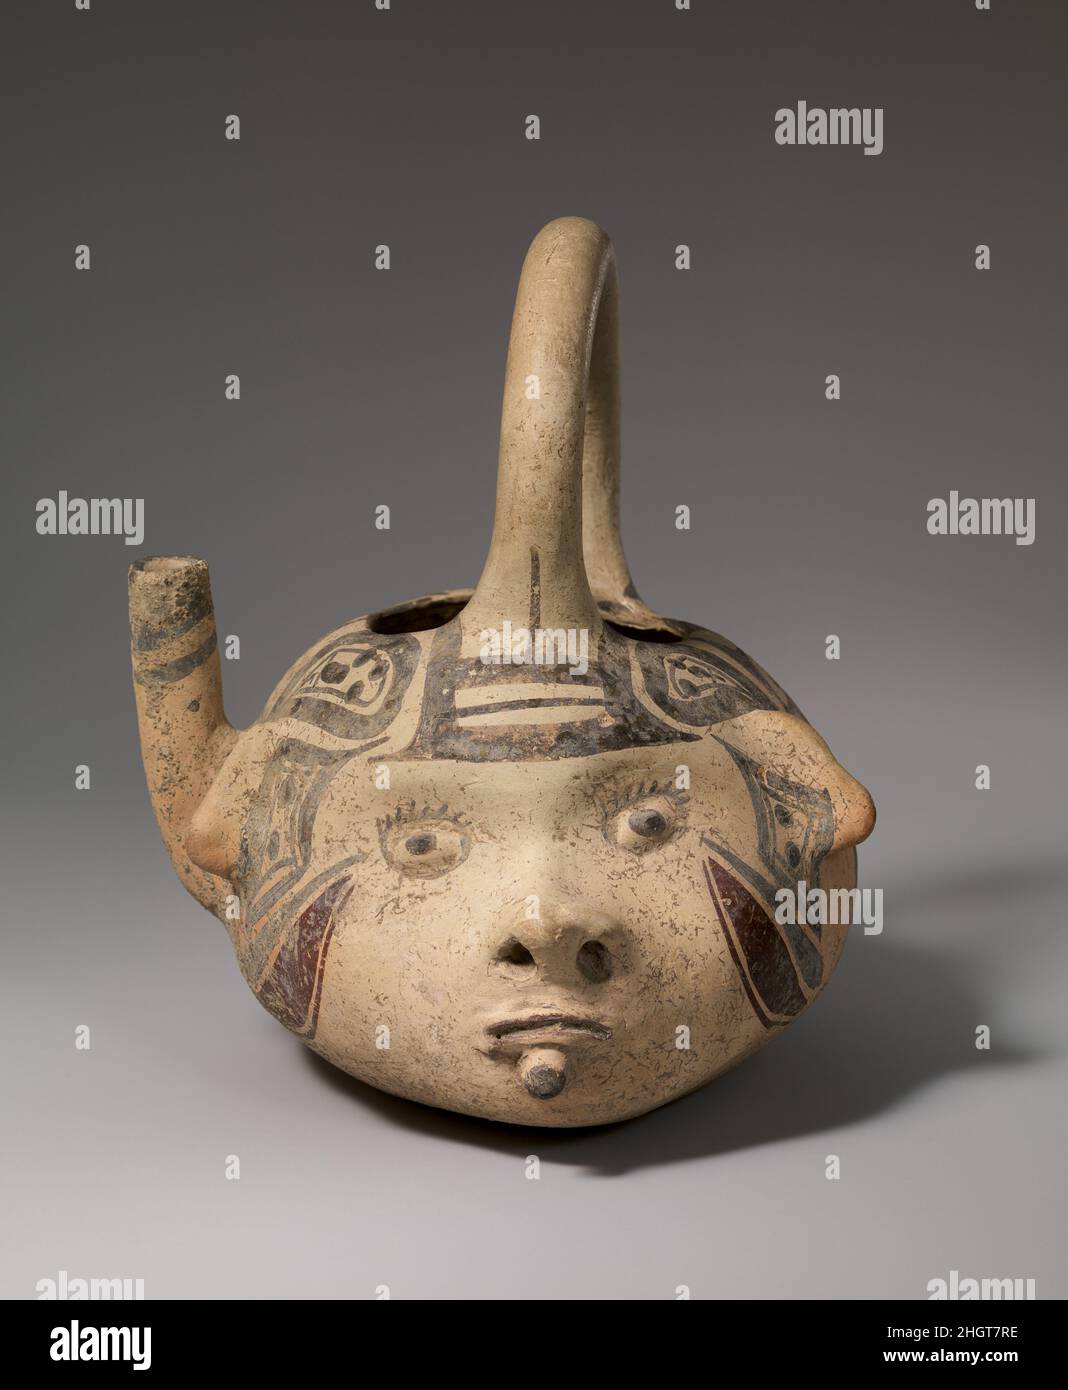 Spouted Vessel 13th–15th century Huastec The vessel is in the shape of a human head with wide open, staring eyes, a small pug nose, and closed mouth. A lip plug is worn in the lower lip. A handle extends from the forehead to the back of the head. On the right side behind the ear projects a single spout pointing upward. On the sides of the face and back of the head the cream-colored surface is covered with geometric motifs including dots, circles, diamonds and crosses in dark brown and purple.. Spouted Vessel. Huastec. 13th–15th century. Ceramic. Mexico, Mesoamerica, Veracruz. Ceramics-Containe Stock Photo